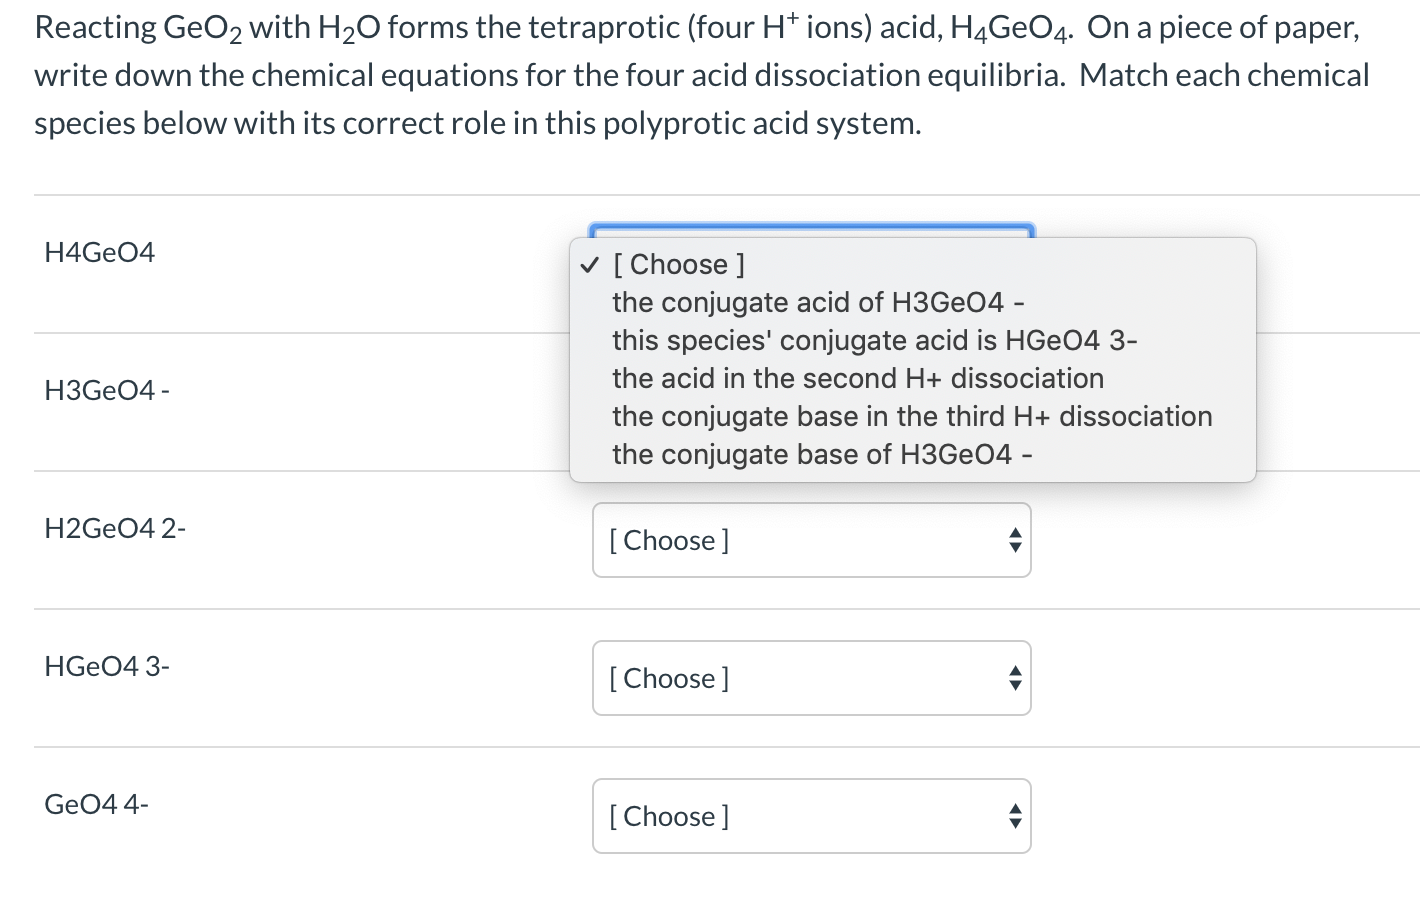 Reacting GeO2 with H20 forms the tetraprotic (four H* ions) acid, H4GEO4. On a piece of paper,
write down the chemical equations for the four acid dissociation equilibria. Match each chemical
species below with its correct role in this polyprotic acid system.
H4GEO4
v [ Choose ]
the conjugate acid of H3GEO4 -
this species' conjugate acid is HGEO4 3-
the acid in the second H+ dissociation
H3GEO4 -
the conjugate base in the third H+ dissociation
the conjugate base of H3GE04 -
H2GEO4 2-
[ Choose ]
HGEO4 3-
[Choose]
GeO4 4-
[Choose]
